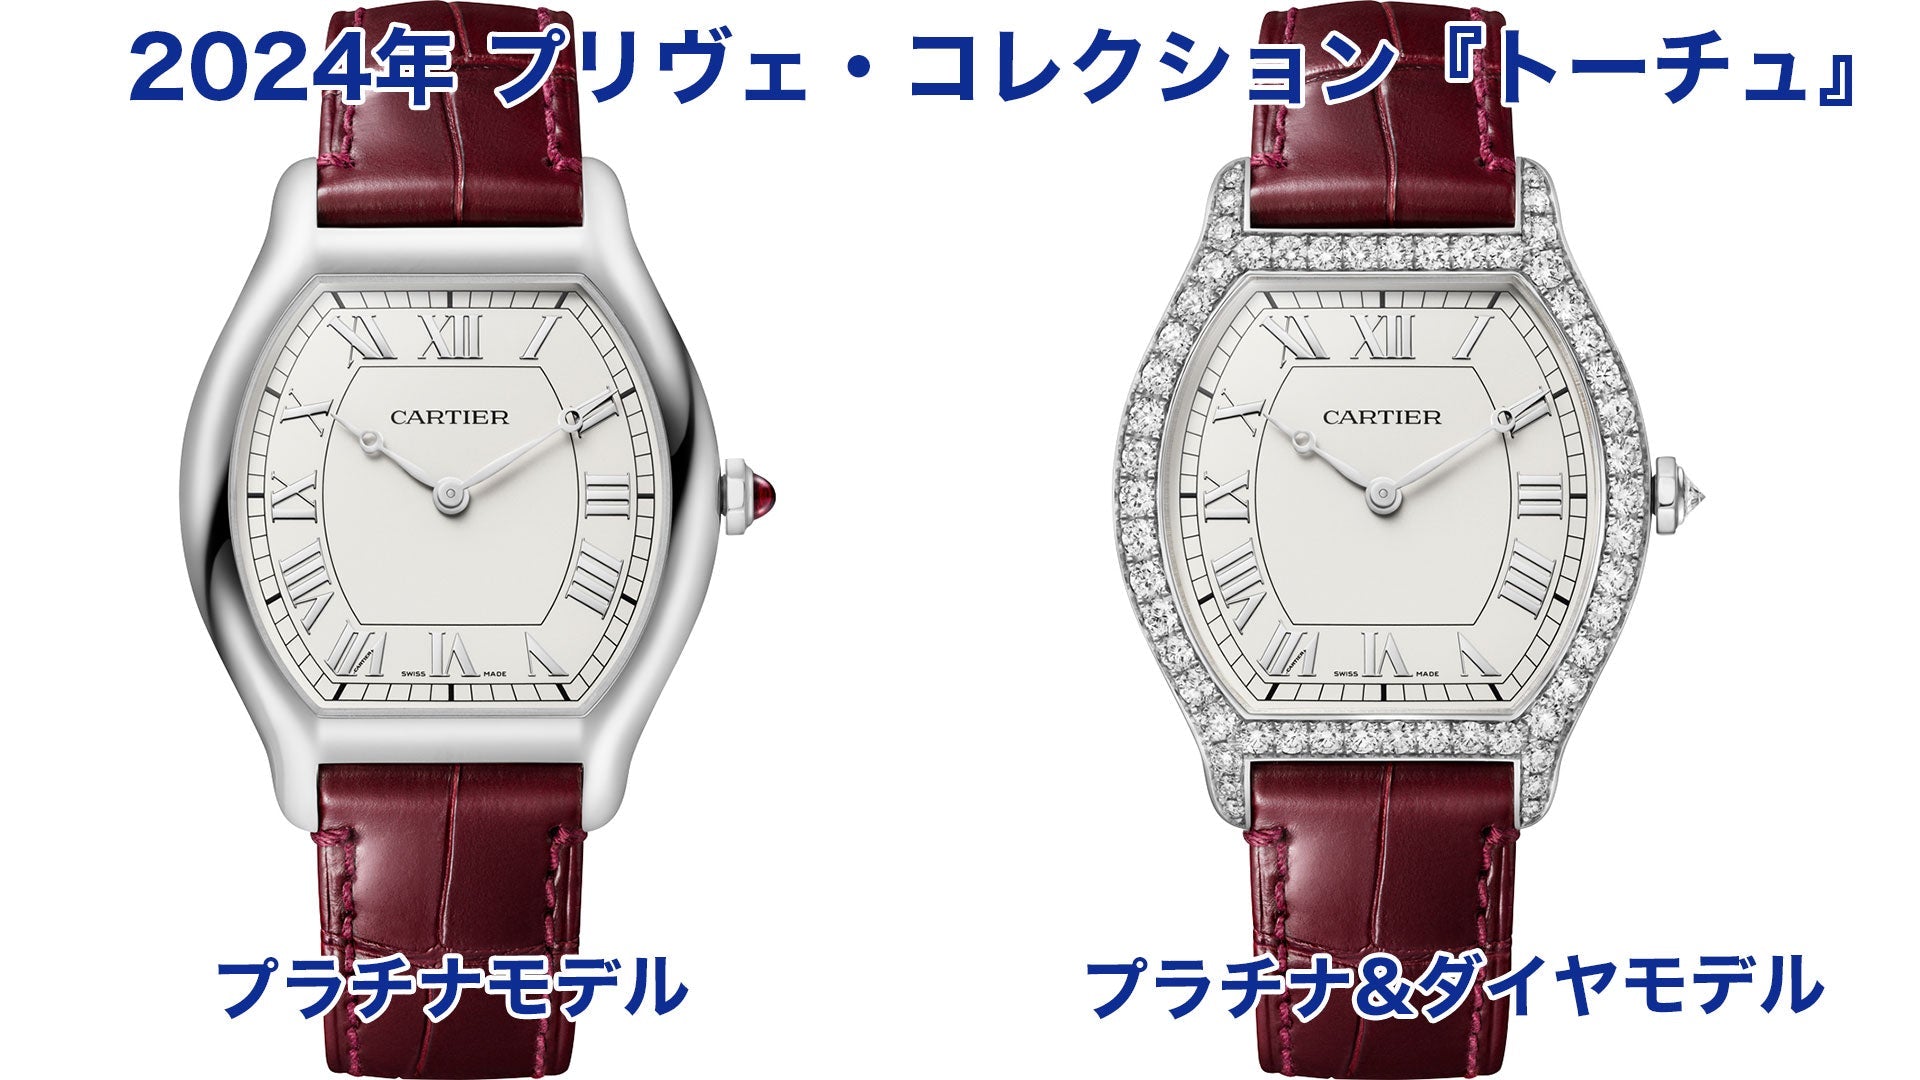 Tortue and Tortue diamond models from the 2024 Privé collection